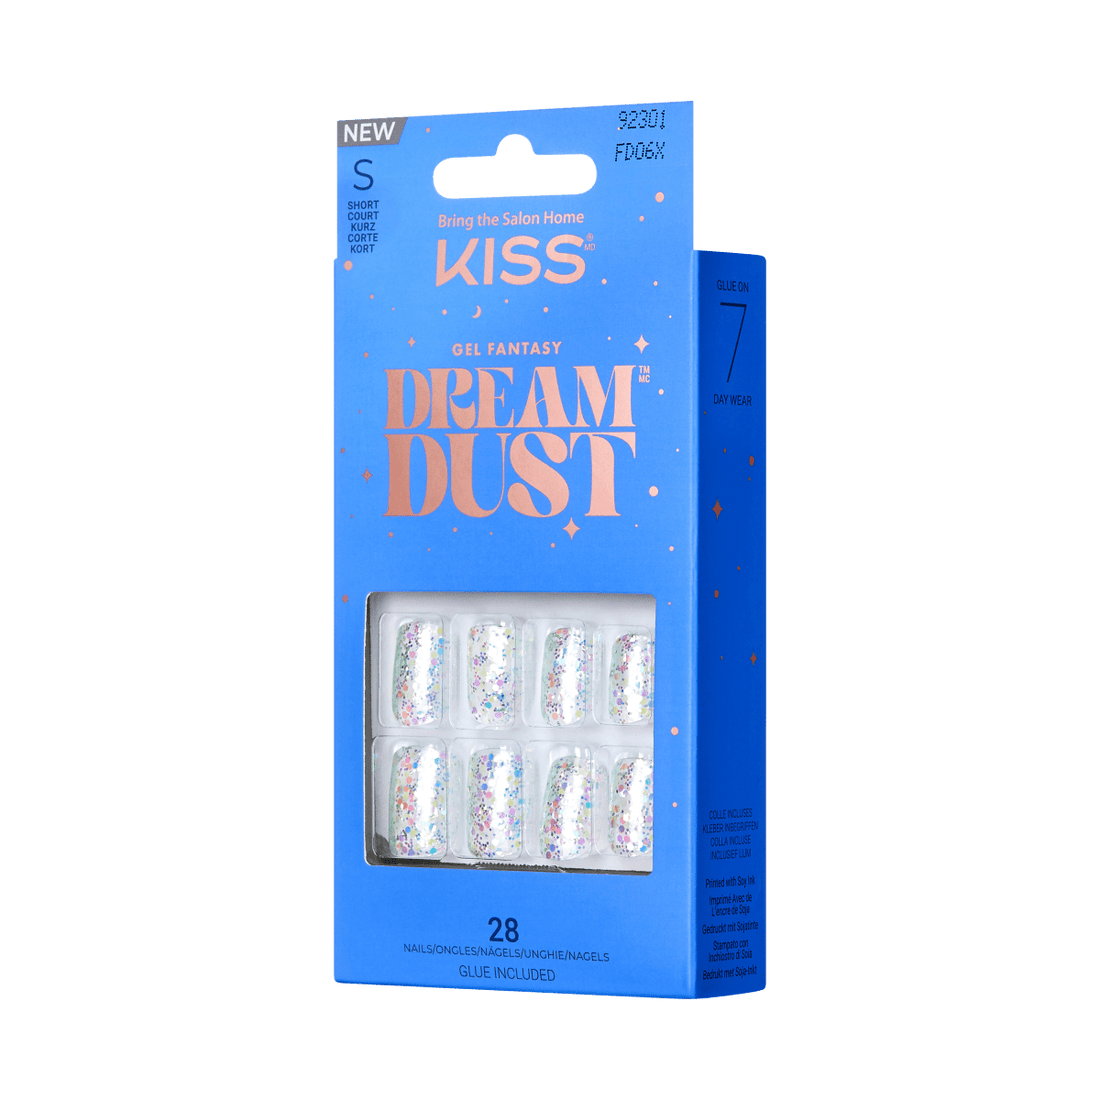 KISS Gel Fantasy Dreamdust, Press-On Nails, Mesmerized, Clear, Short Squoval, 28ct